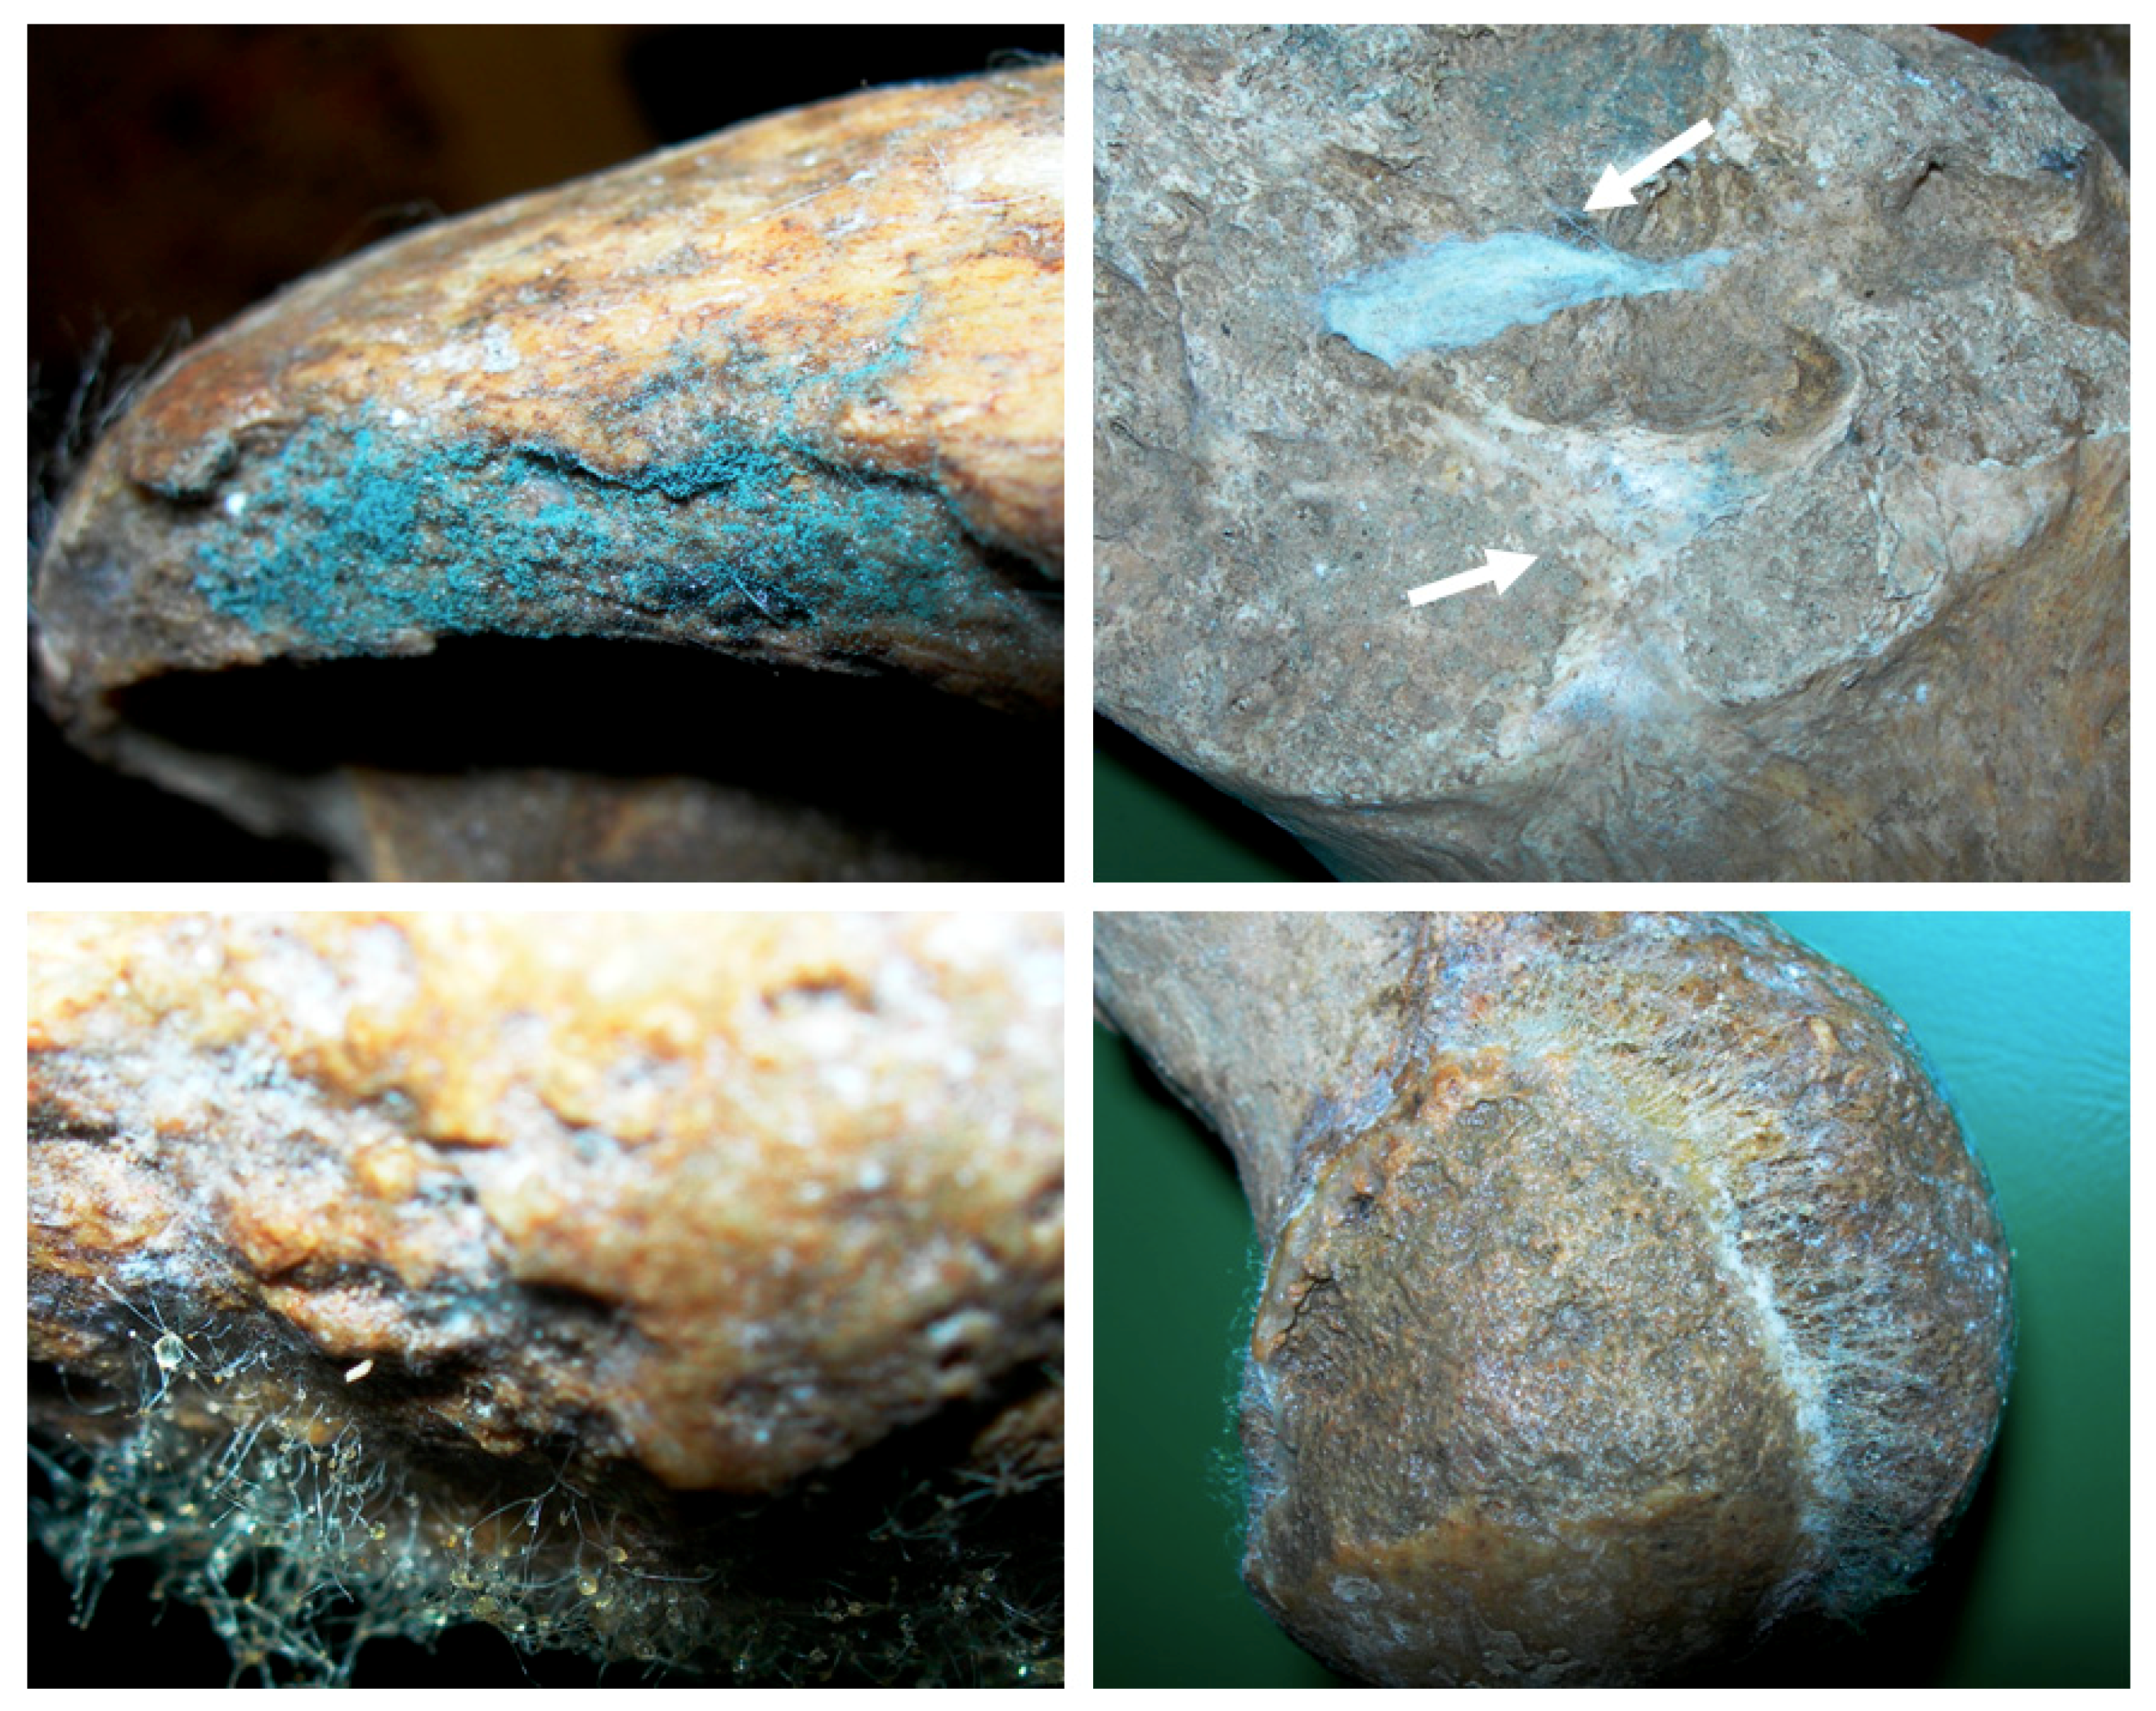 | Free Full-Text | Diversity Species and Susceptibility Phenotypes toward Commercially Available Fungicides of Cultivable Fungi Colonizing Bones of Ursus spelaeus on Display in Niedźwiedzia Cave (Kletno, Poland)